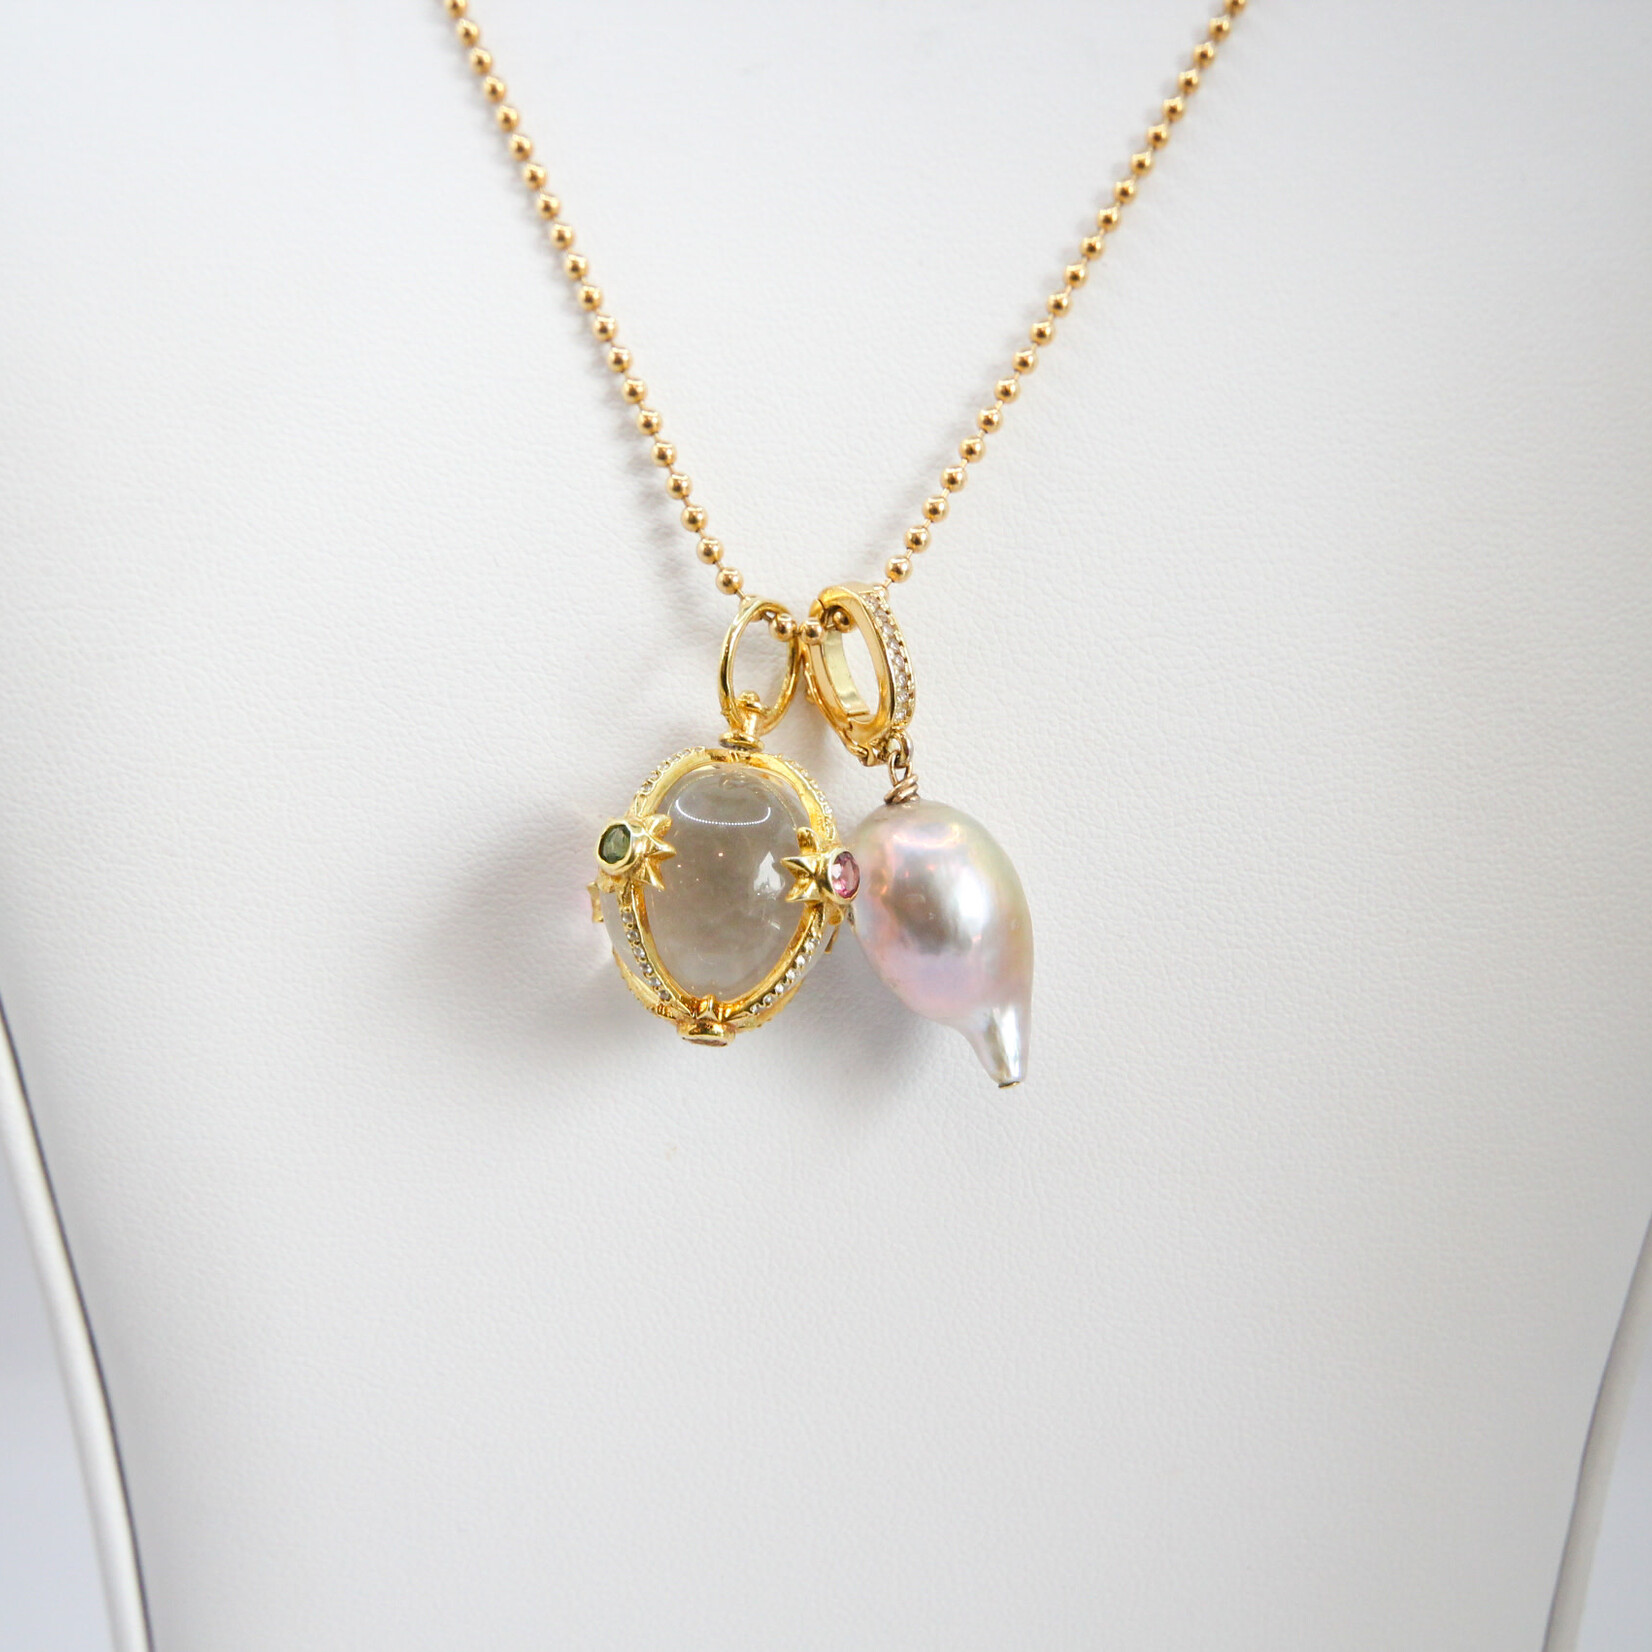 Pave Diamond Clear Globe with Gemstones & Pink Baroque Pearl on Gold Ball Chain Necklace